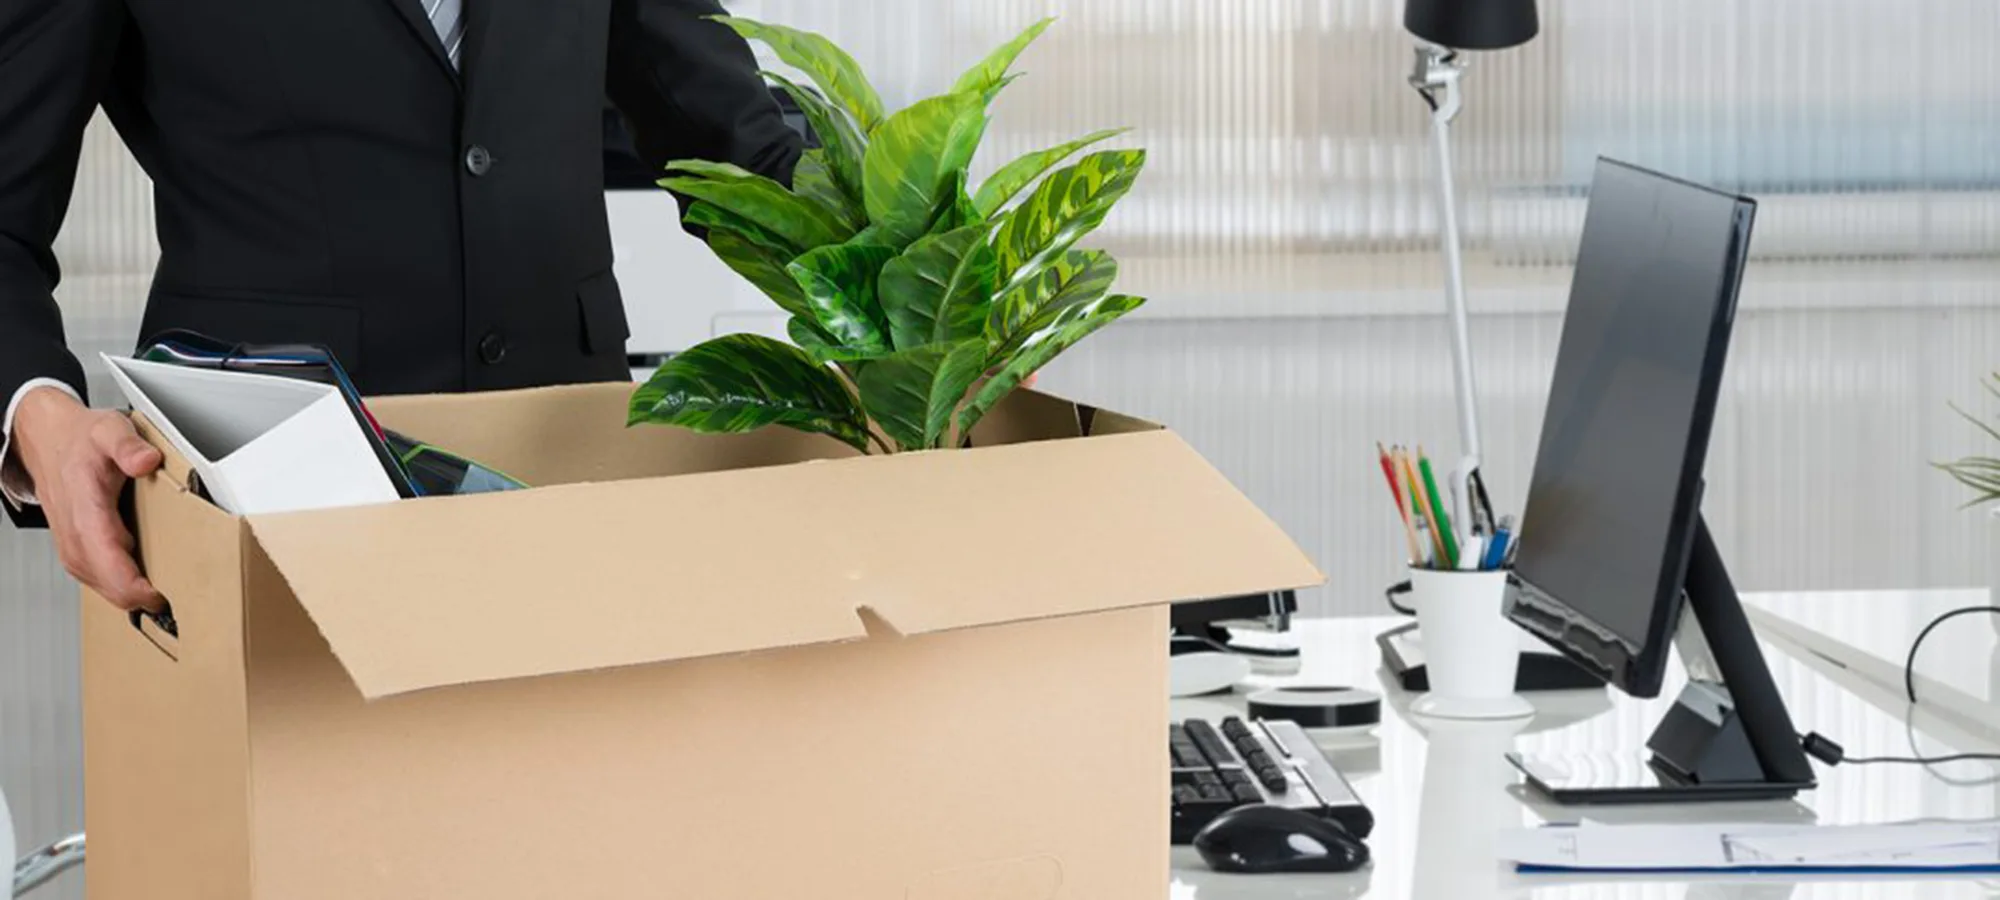 employee putting their office desk things into a cardboard box